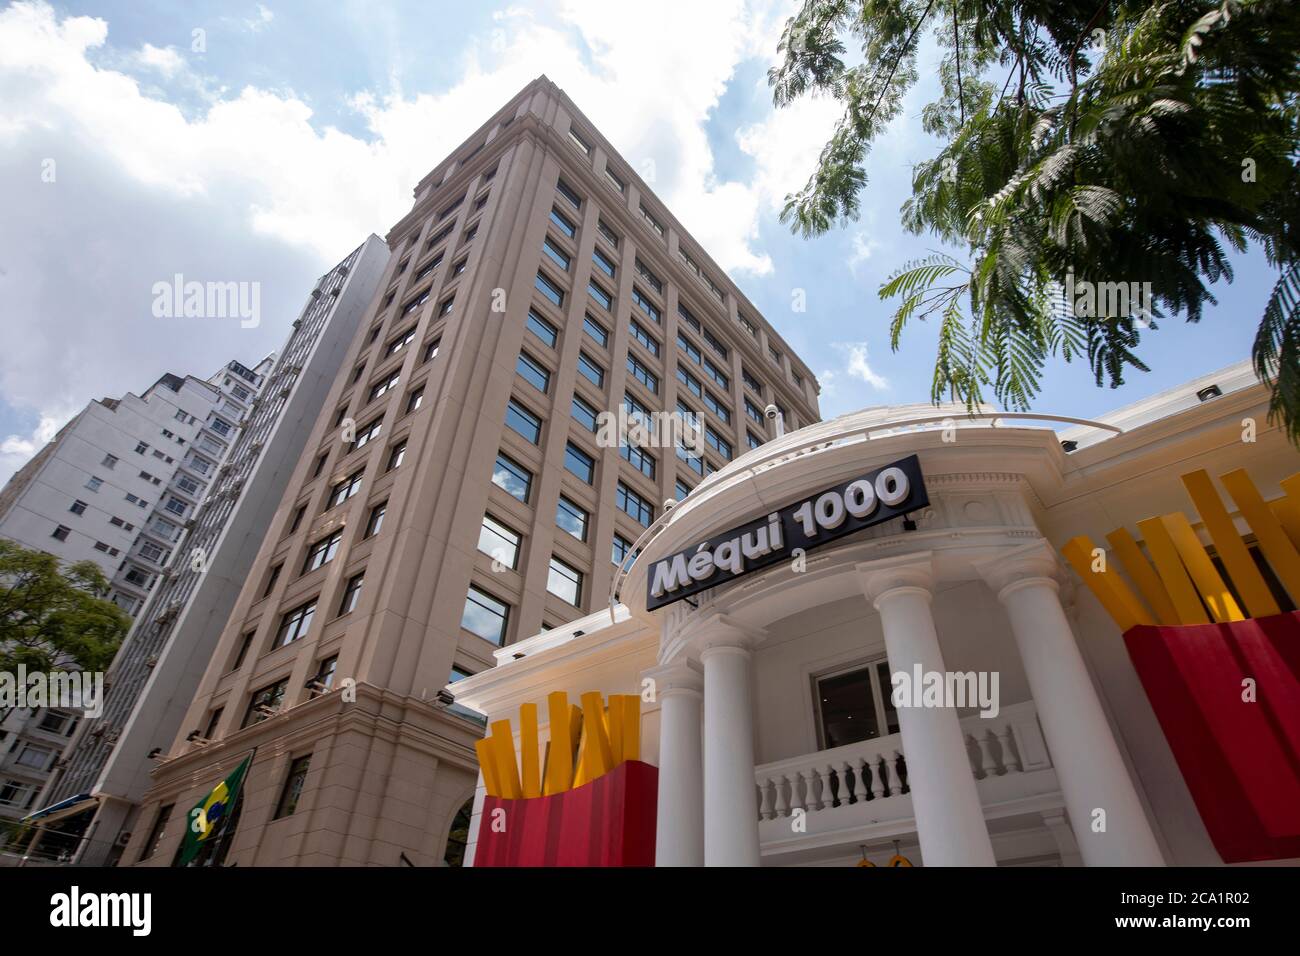 Sao Paulo, Brazil -  december 29 2019 - The logo used  on facade of Mc Donald s store in celebration of the 1000th McDonald's store in Brazil Stock Photo